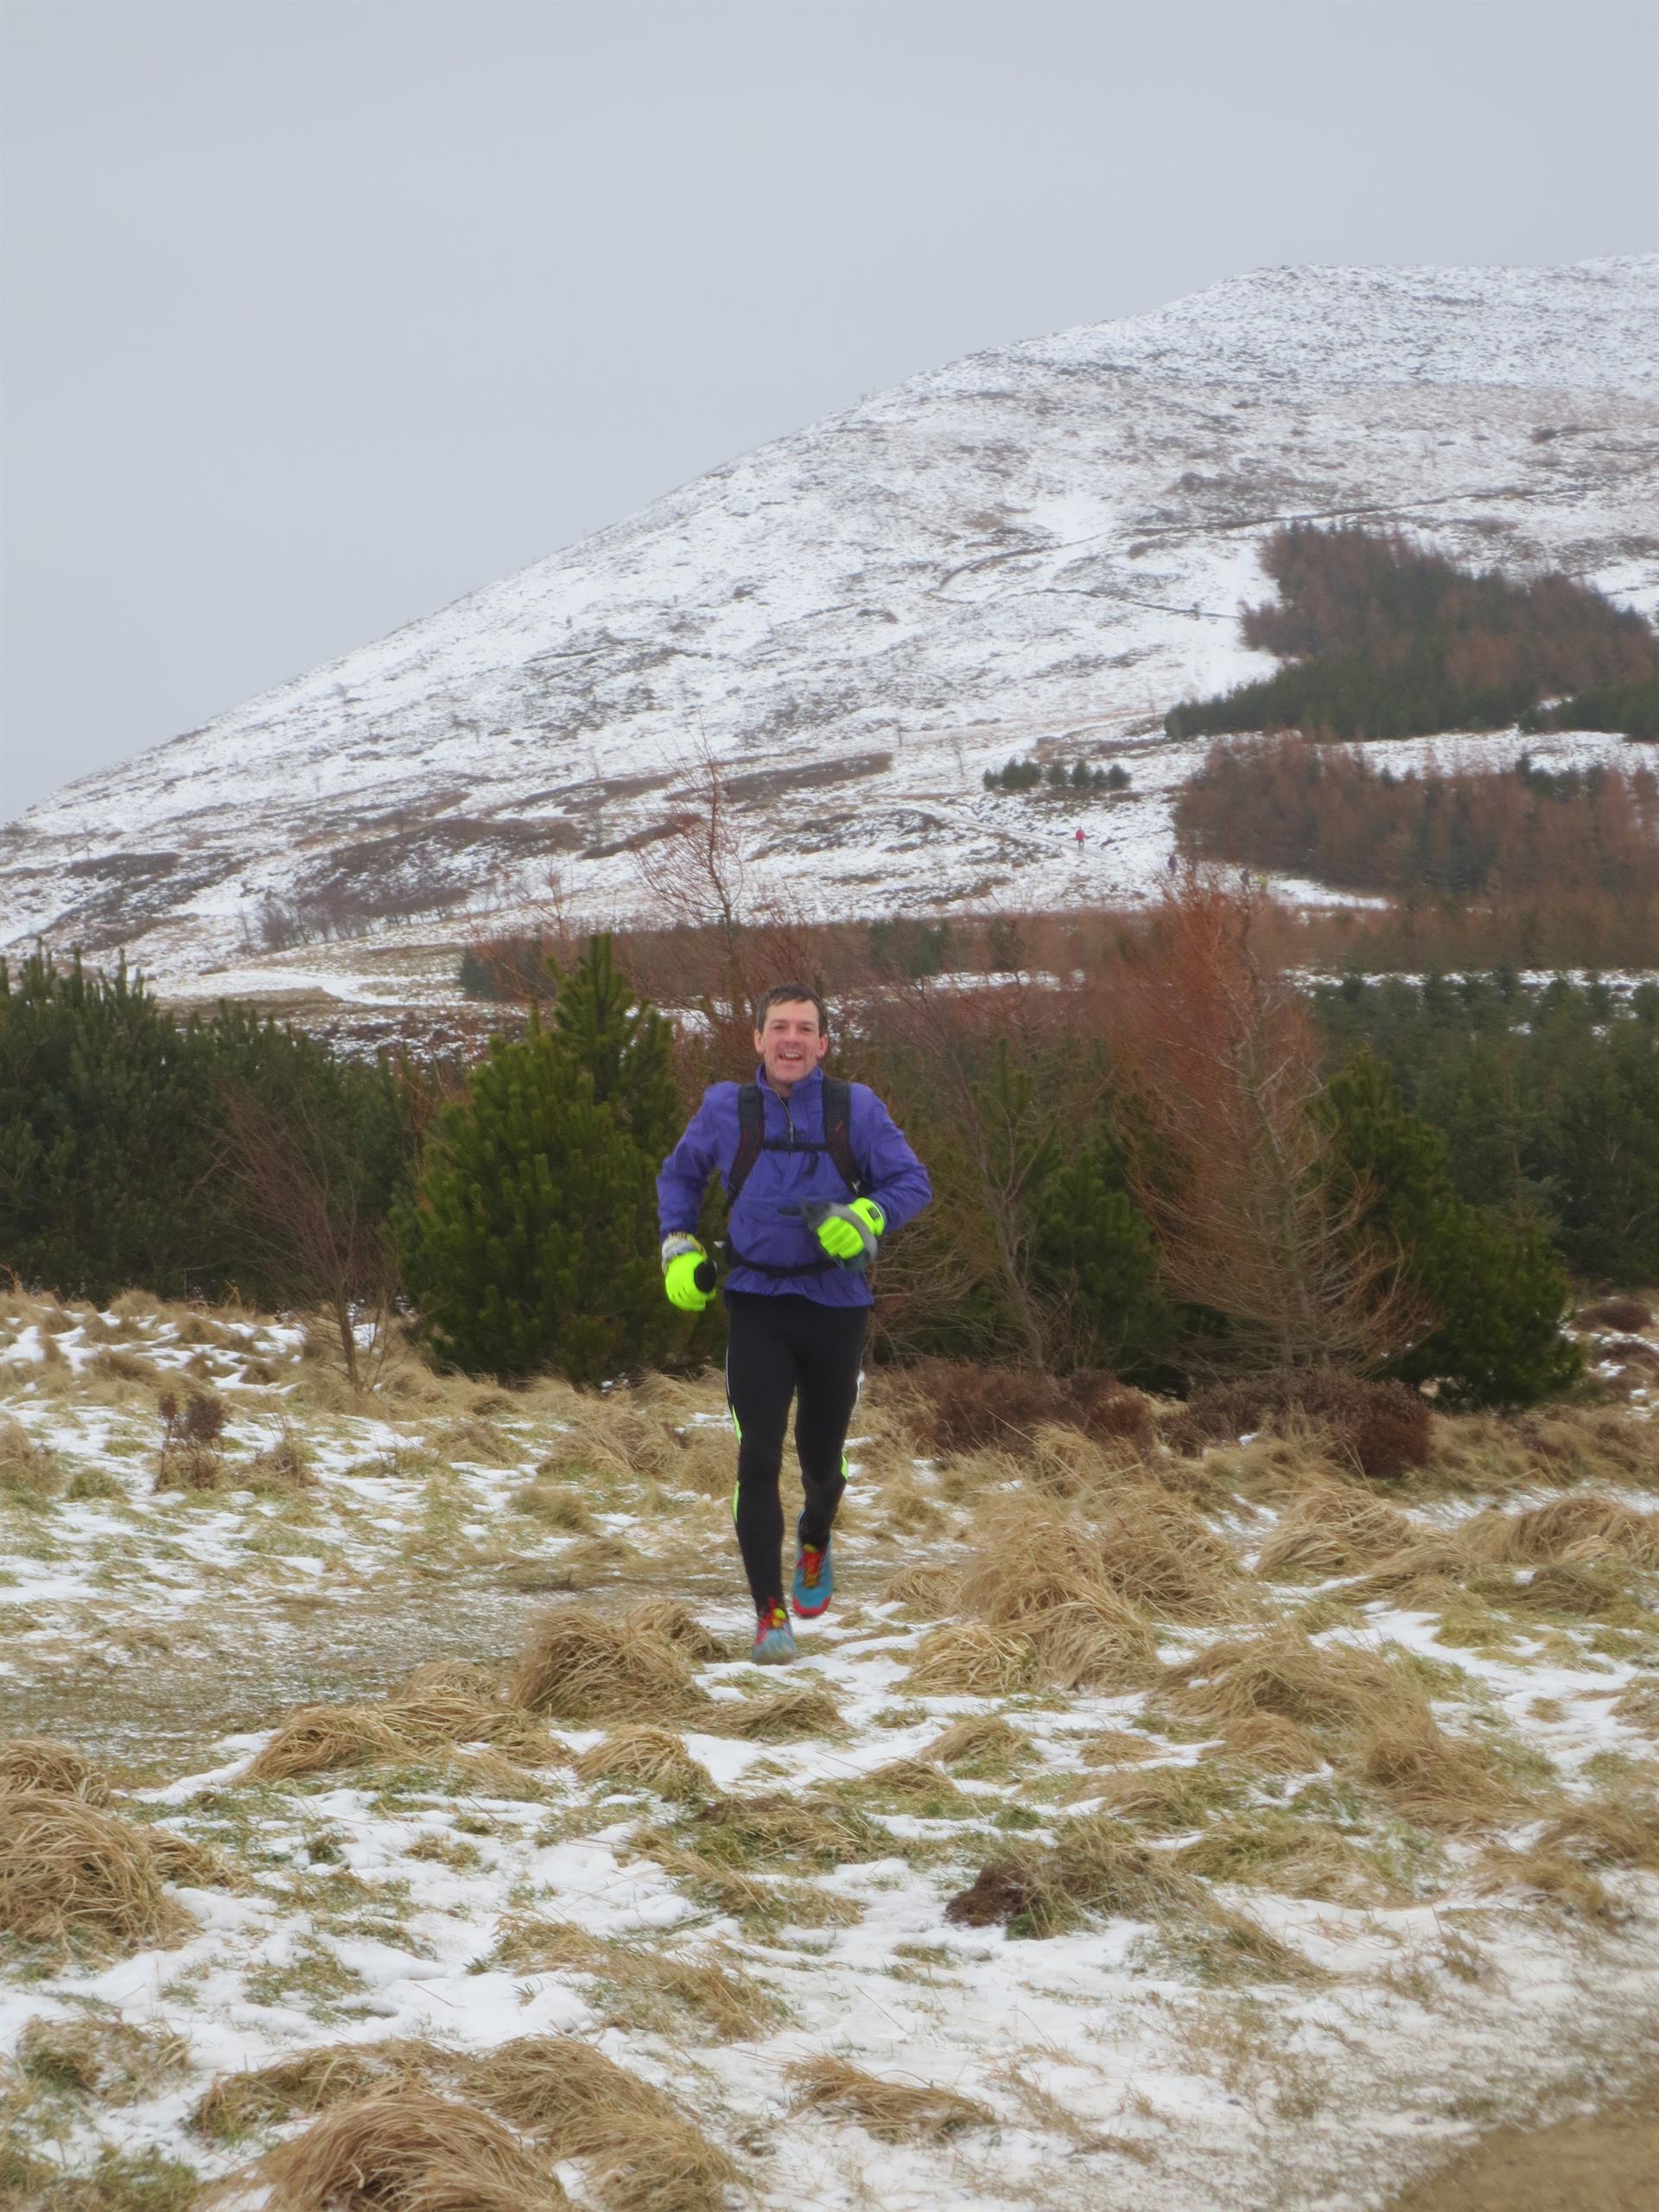 John approaching Lordstones on the Hardmoors 55 Ultramarathon. It was a day out in the countryside and a great event, but it was a struggle to run 55 miles across the North Yorkshire Moors in the snow.